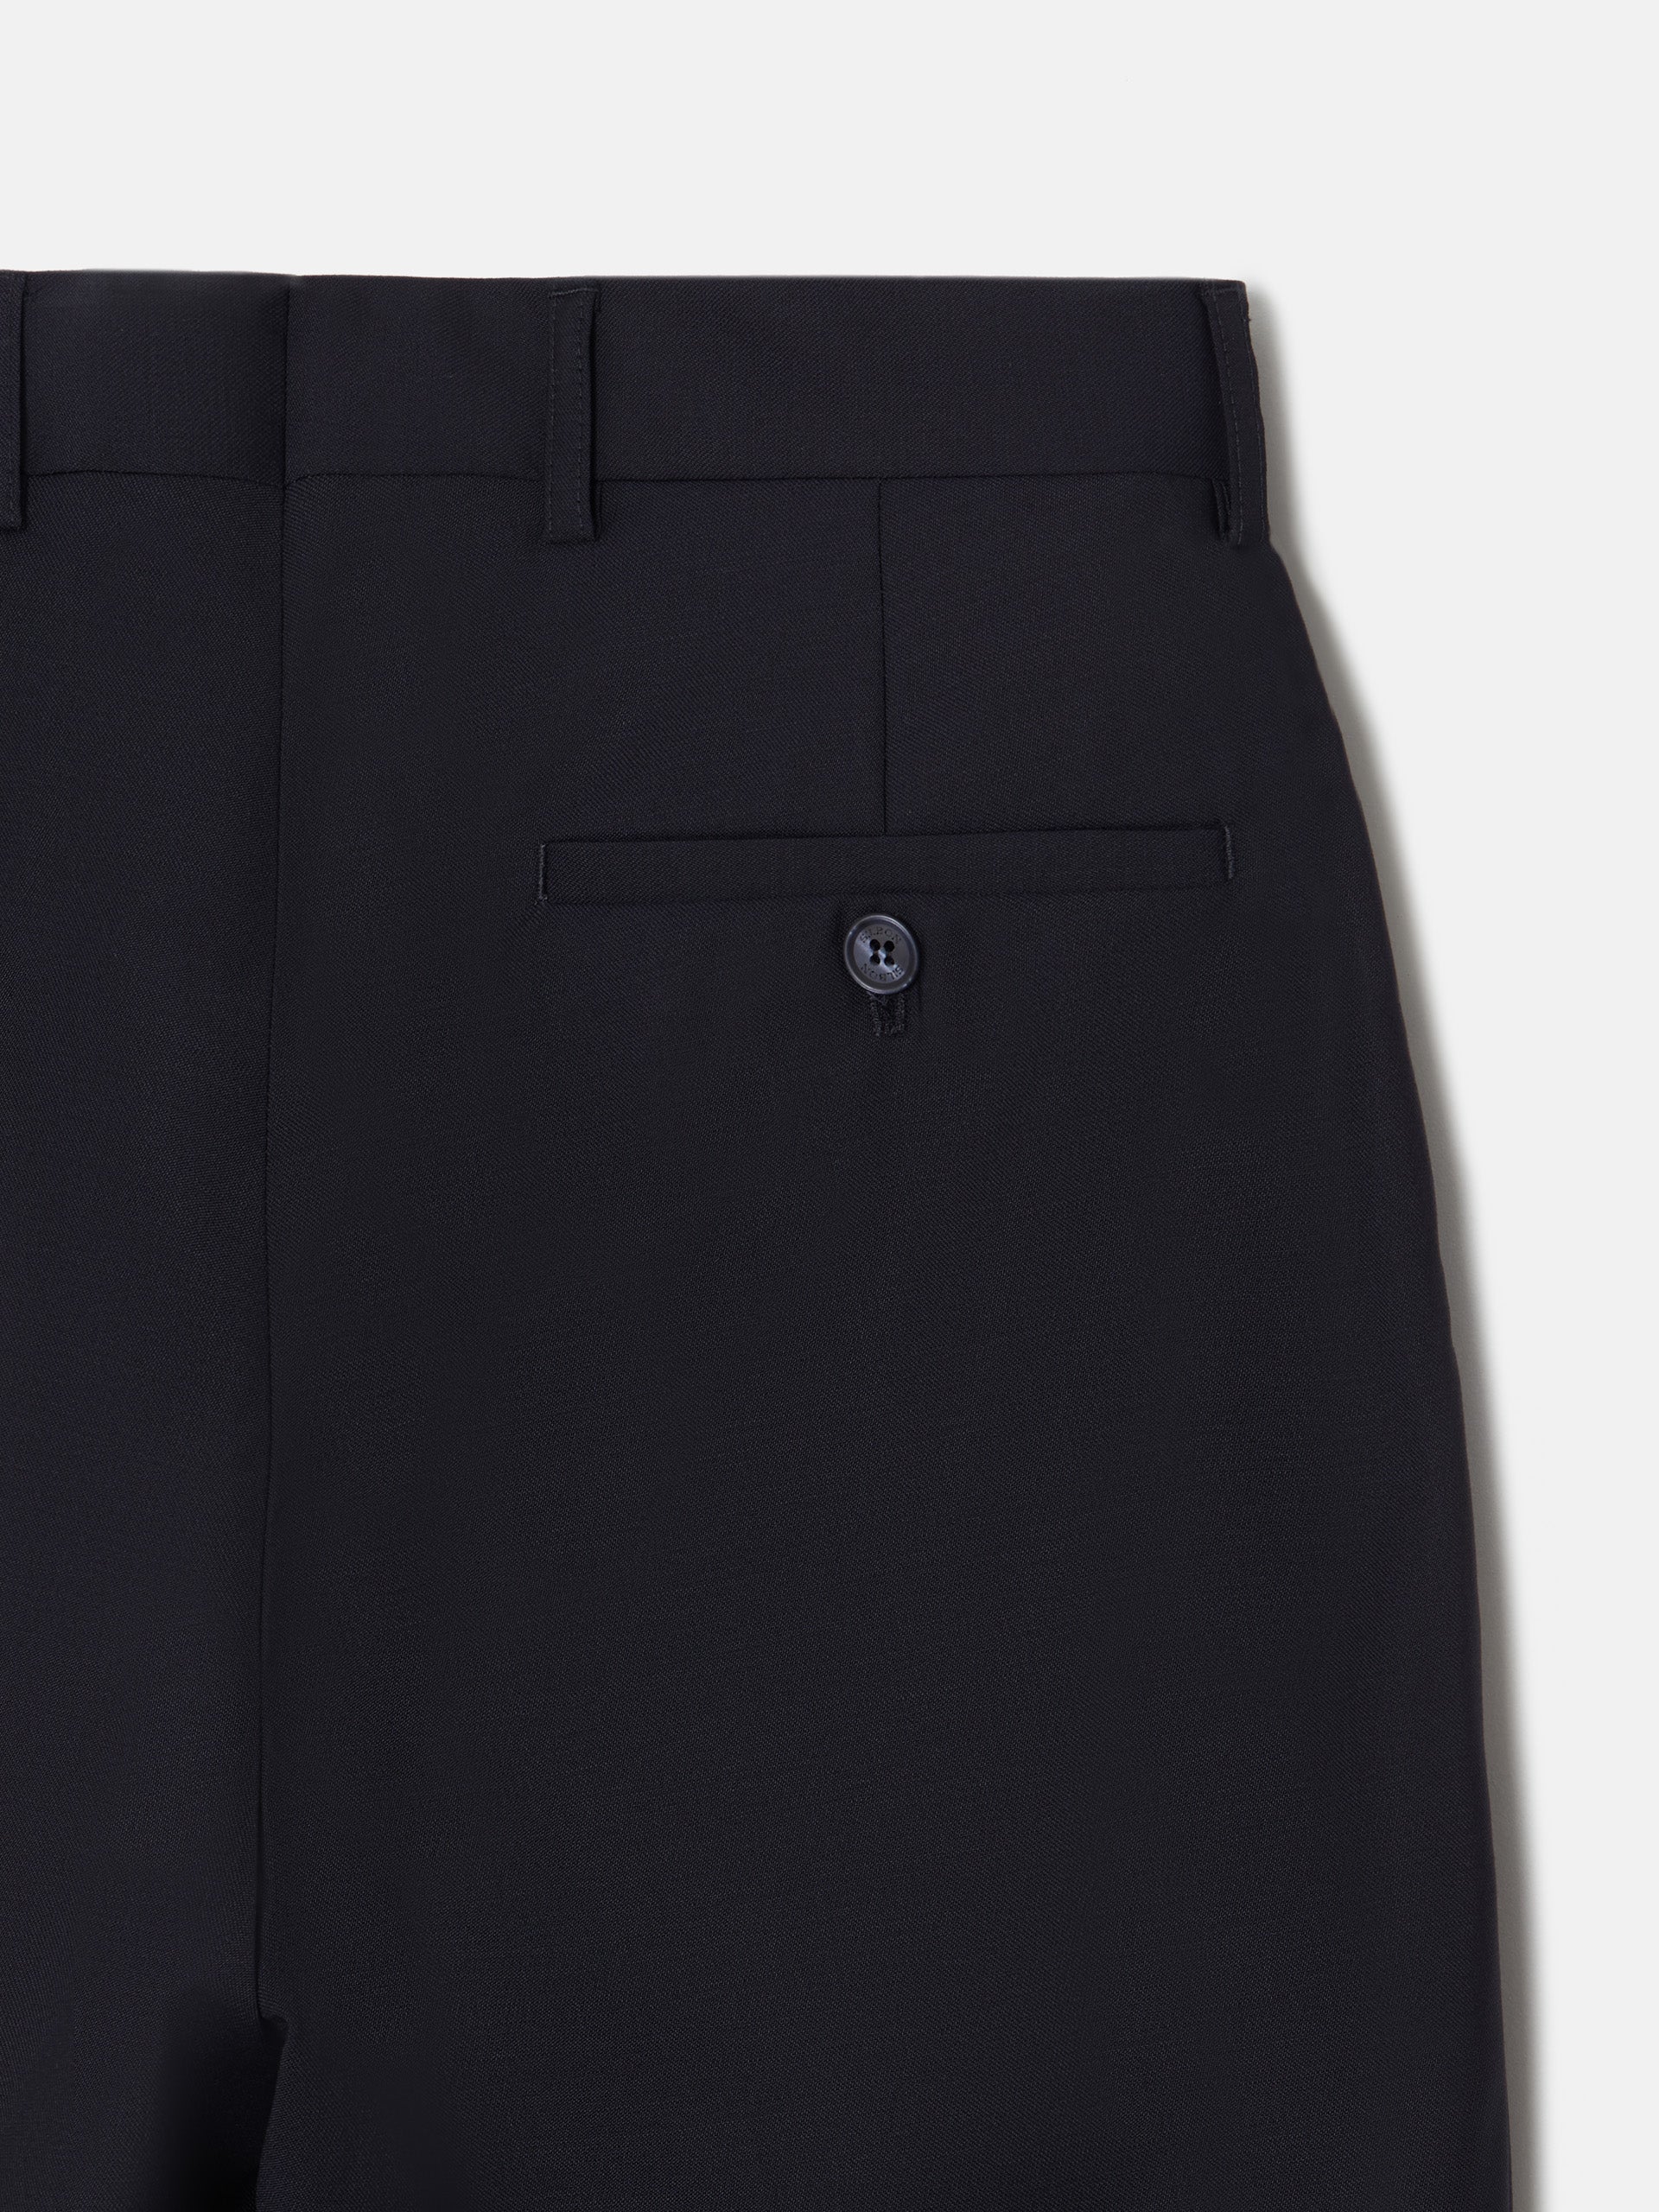 Navy blue stretch double-breasted suit pants